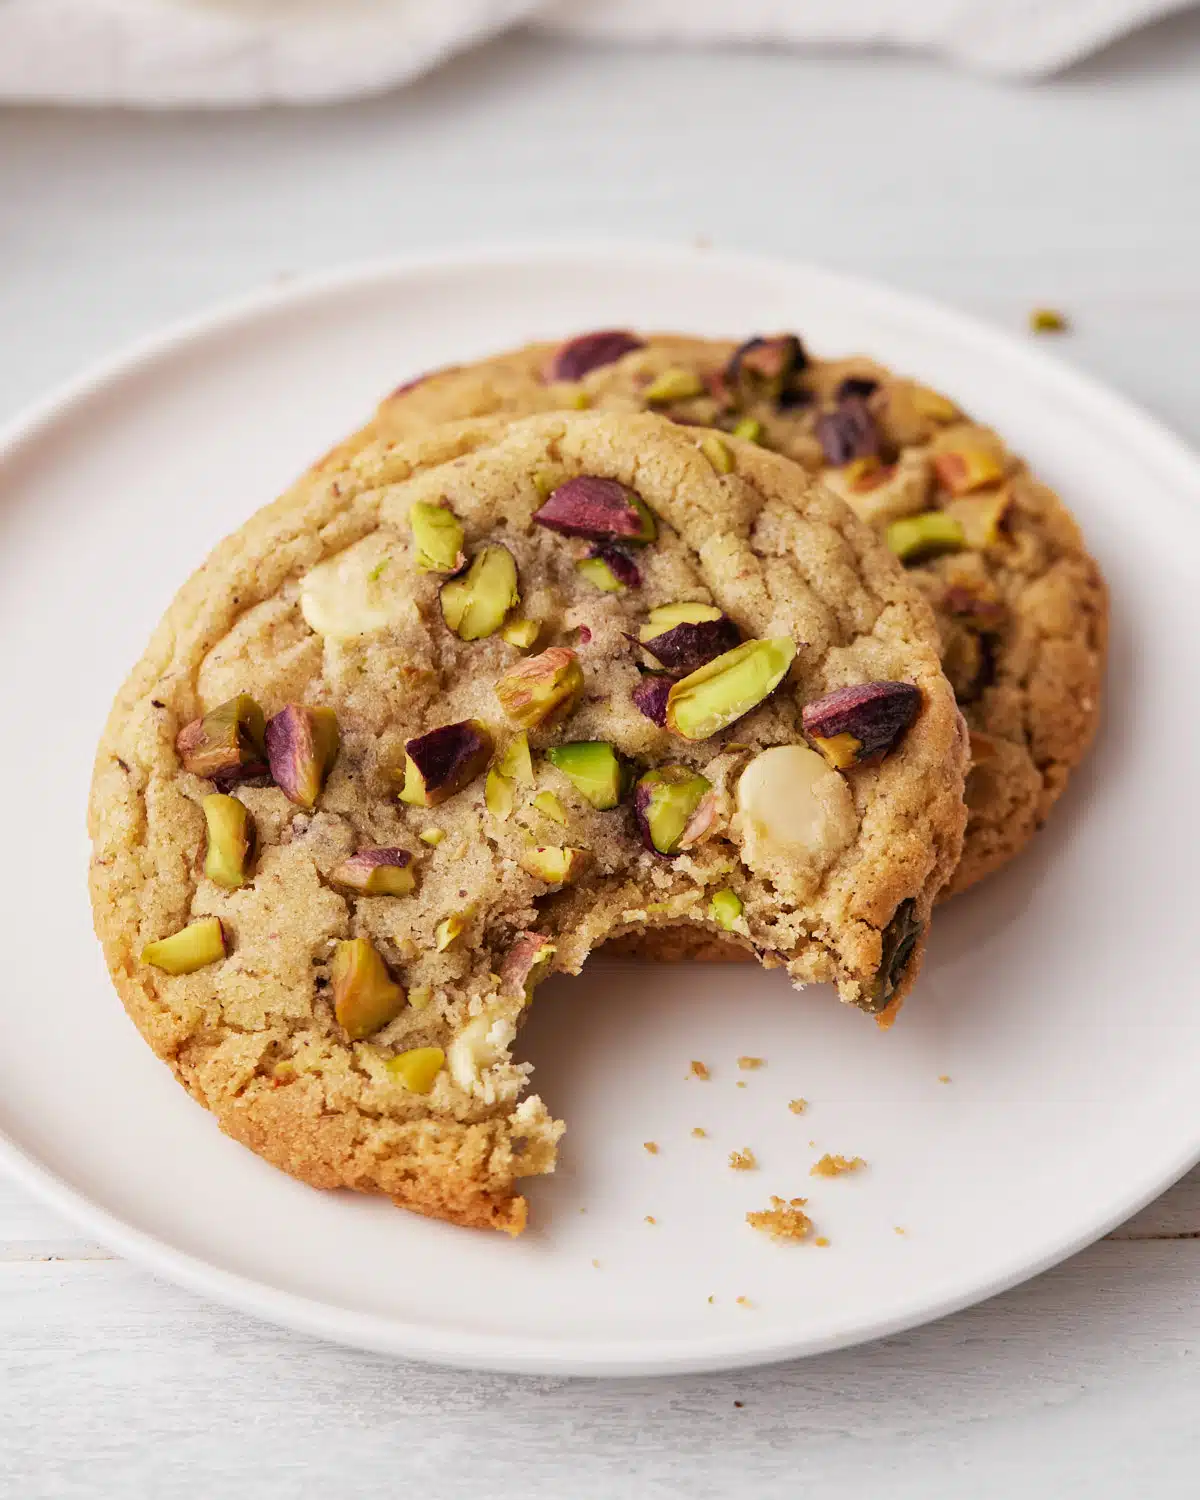 two pistachio cookies on a plate, one with a bite taken out.